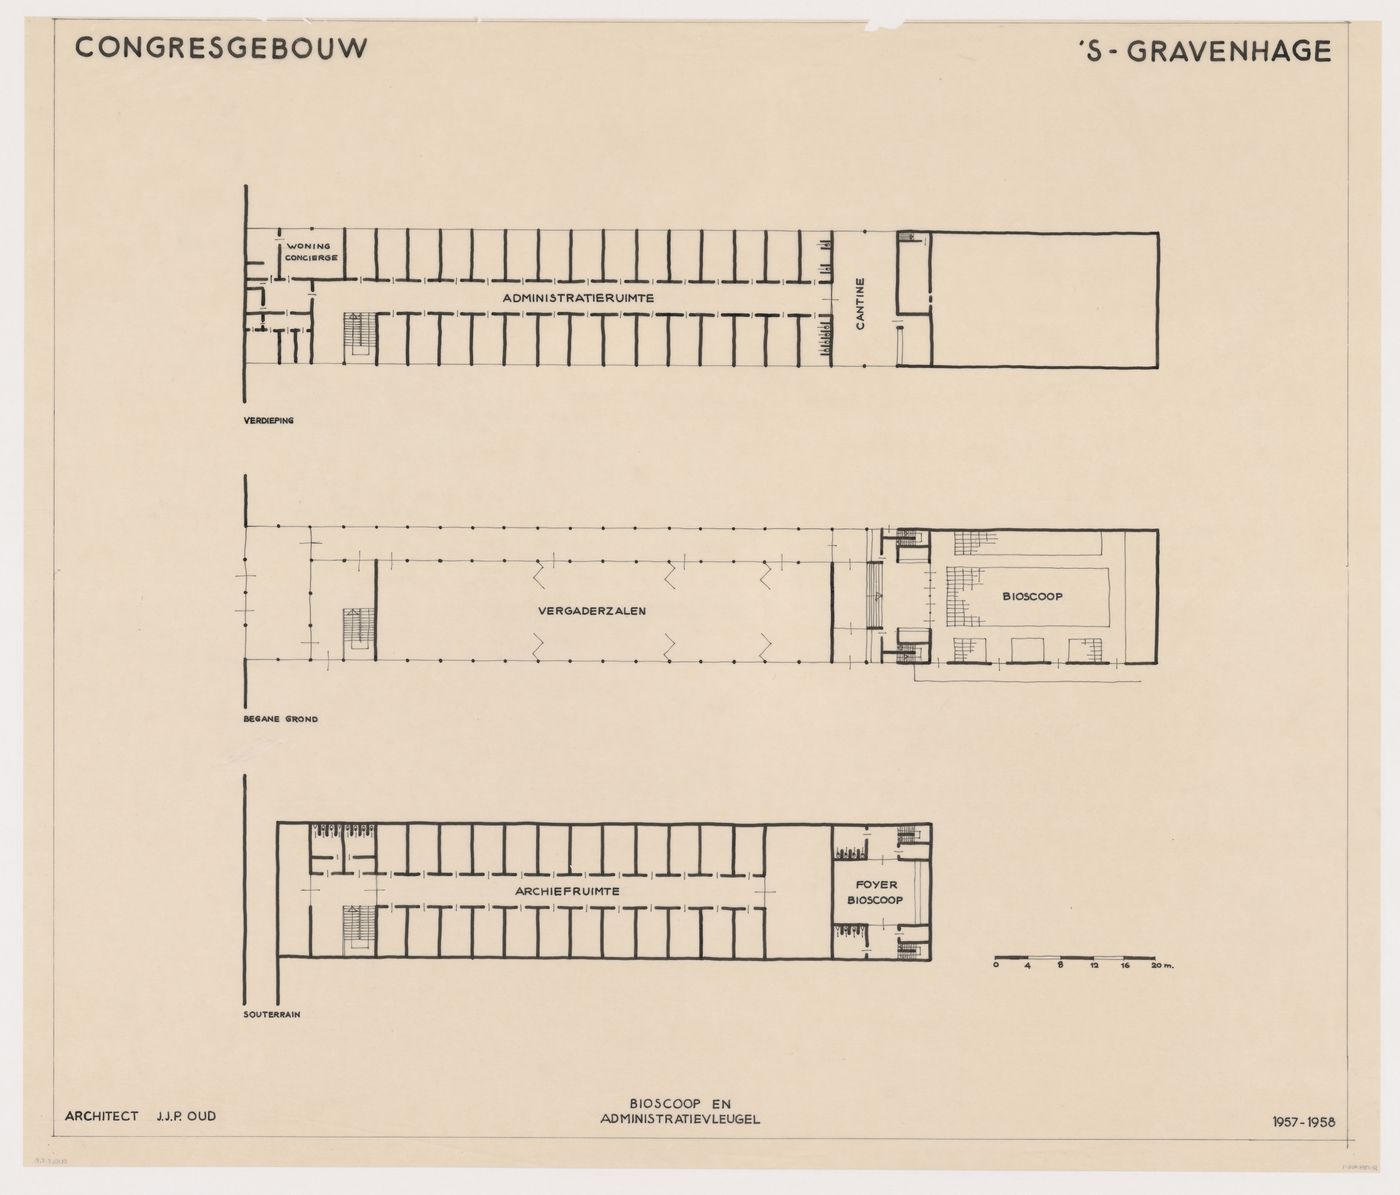 Basement, ground and first floor plans for the cinema and administrative wing for the Congress Hall Complex, The Hague, Netherlands